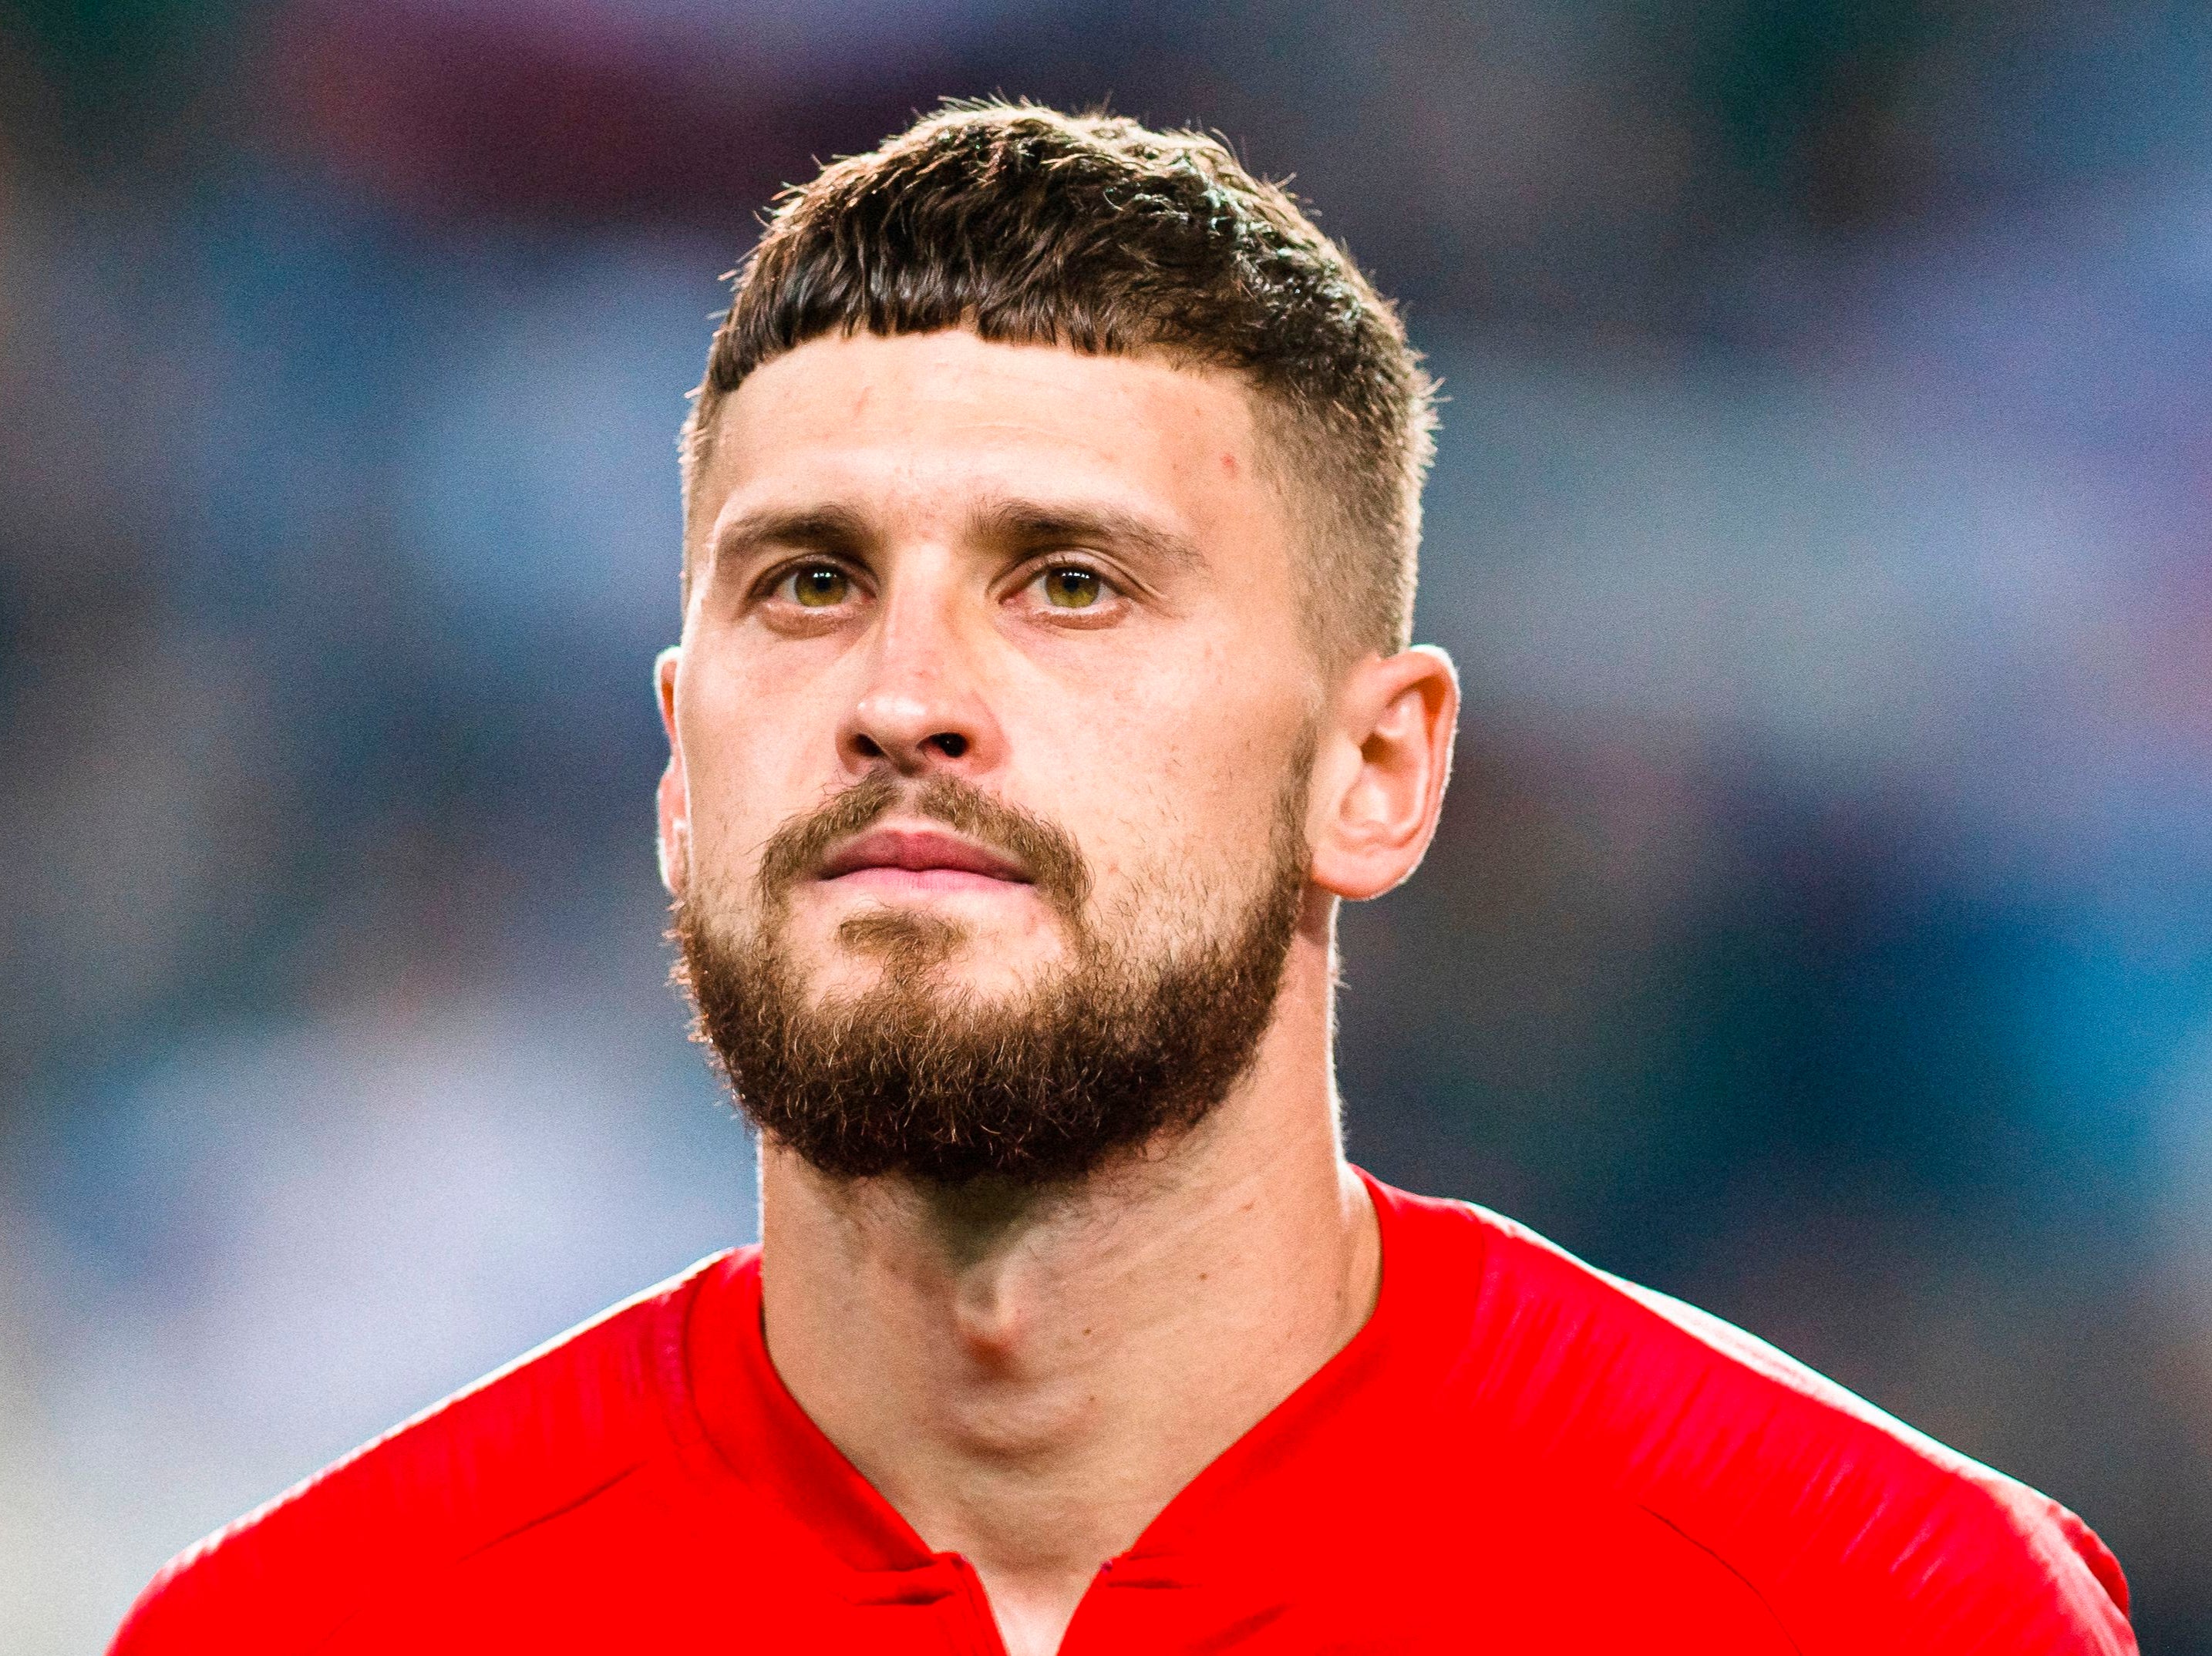 Leeds midfielder Mateusz Klich tests positive for coronavirus while on international duty with Poland | The Independent